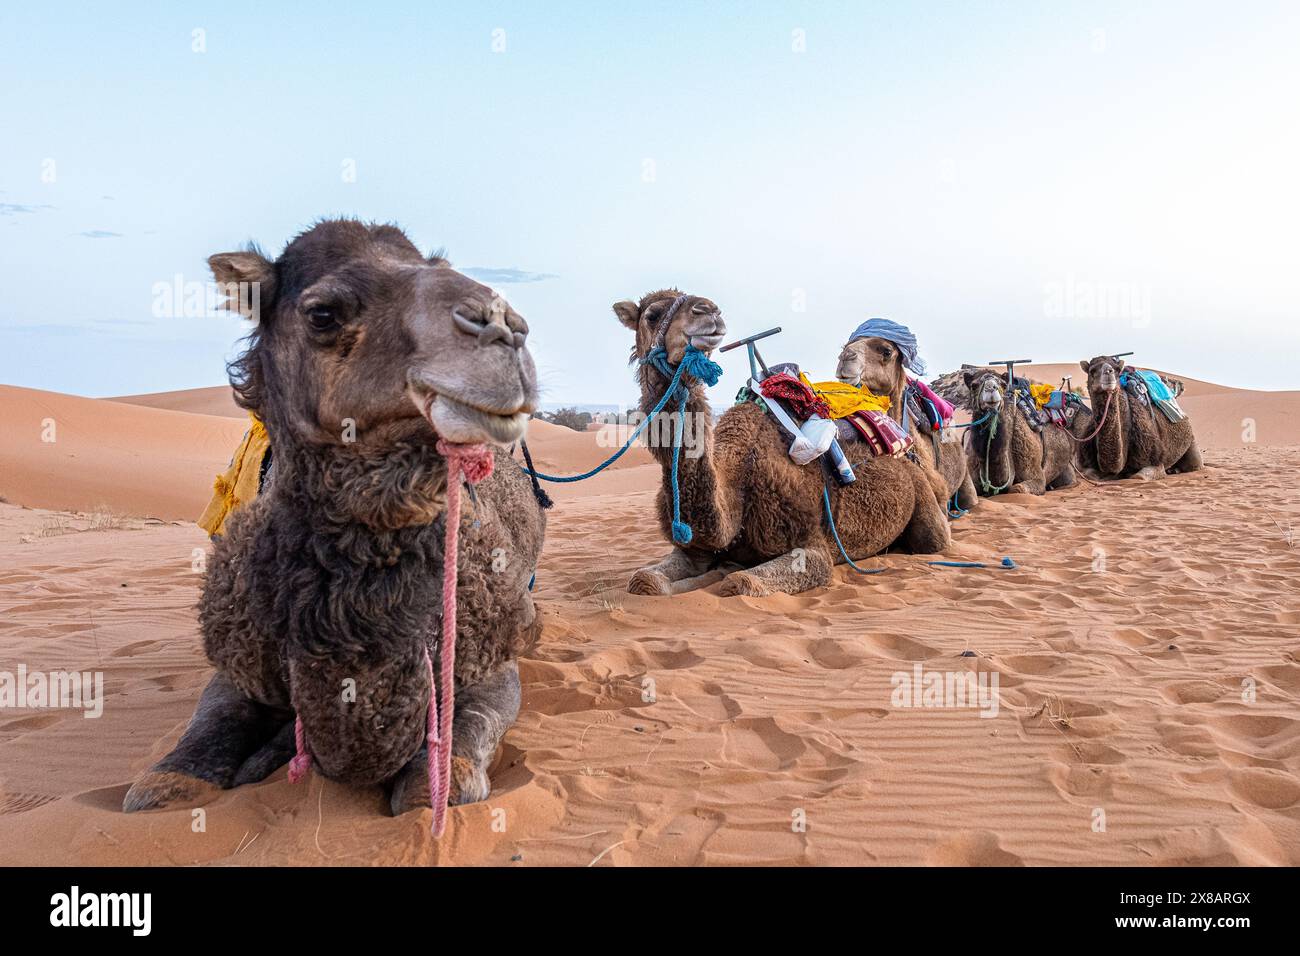 A line of five camels lay in the sand of the Sahara Desert. Stock Photo